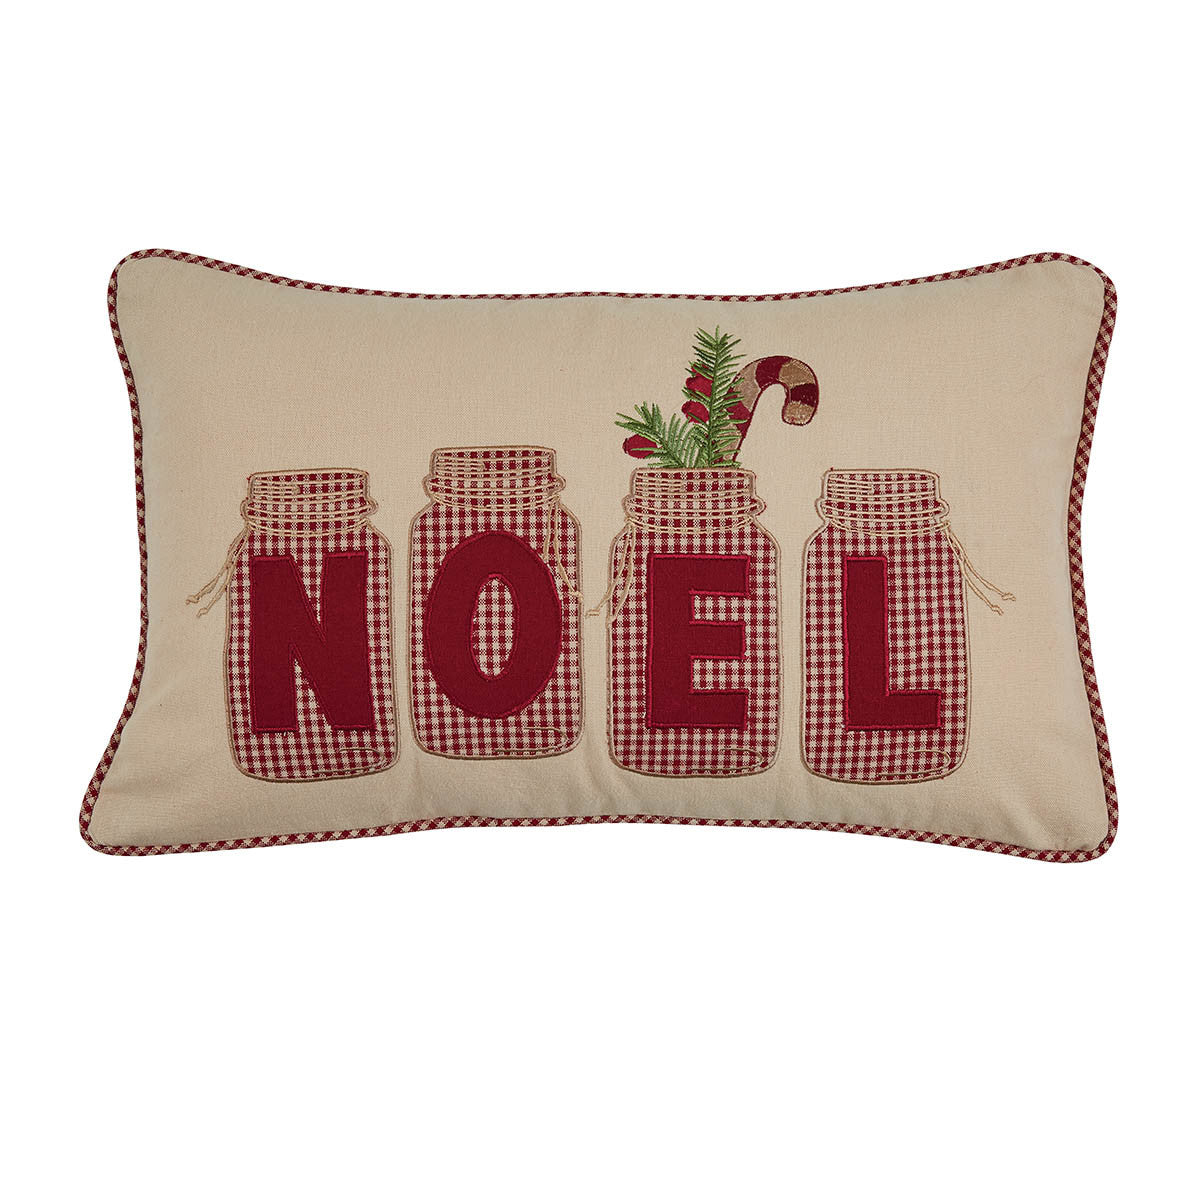 Noel Jar Applique  Pillow with Polyester Insert - 20" x 12" Set of 2 Park Designs